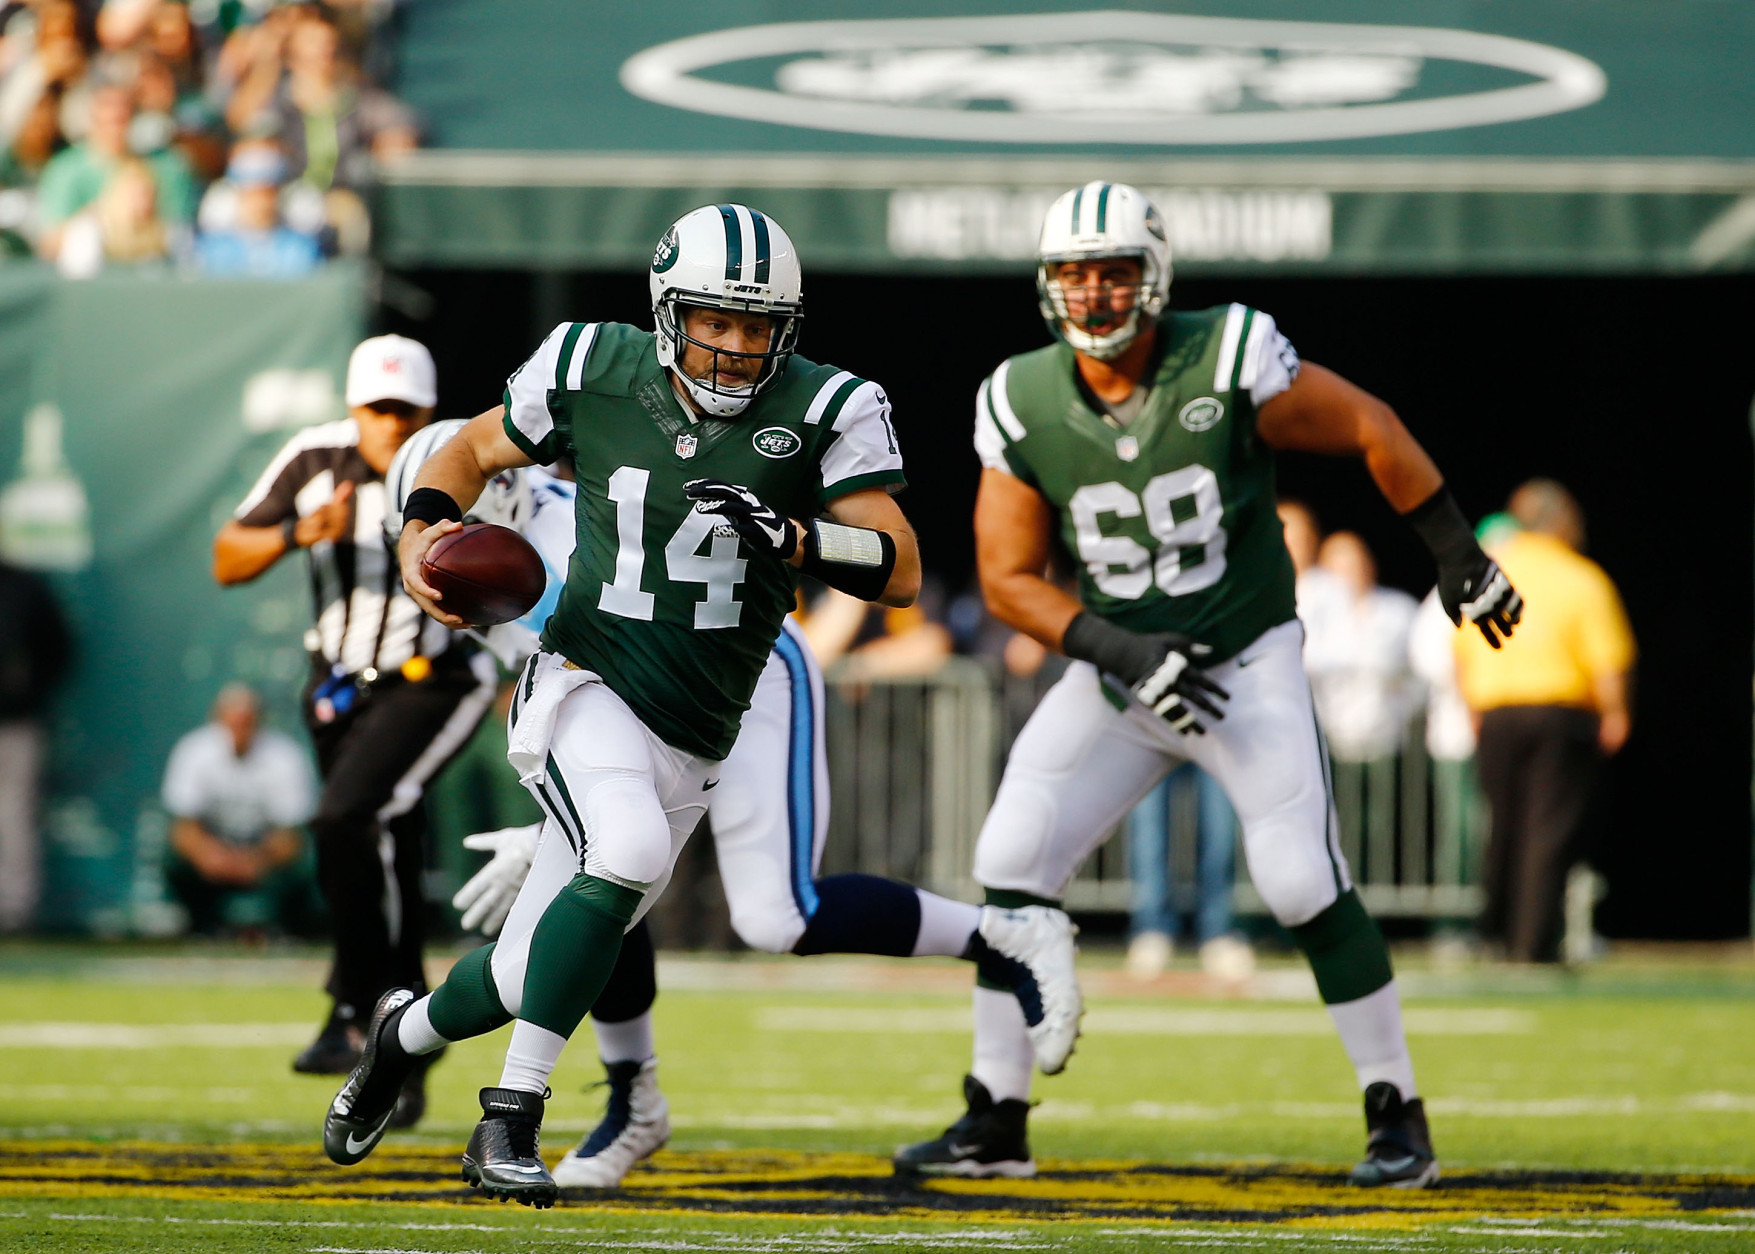 EAST RUTHERFORD, NJ - DECEMBER 13:  Ryan Fitzpatrick #14 of the New York Jets runs the ball against the Tennessee Titans in the first quarter during their game at MetLife Stadium on December 13, 2015 in East Rutherford, New Jersey.  (Photo by Al Bello/Getty Images)